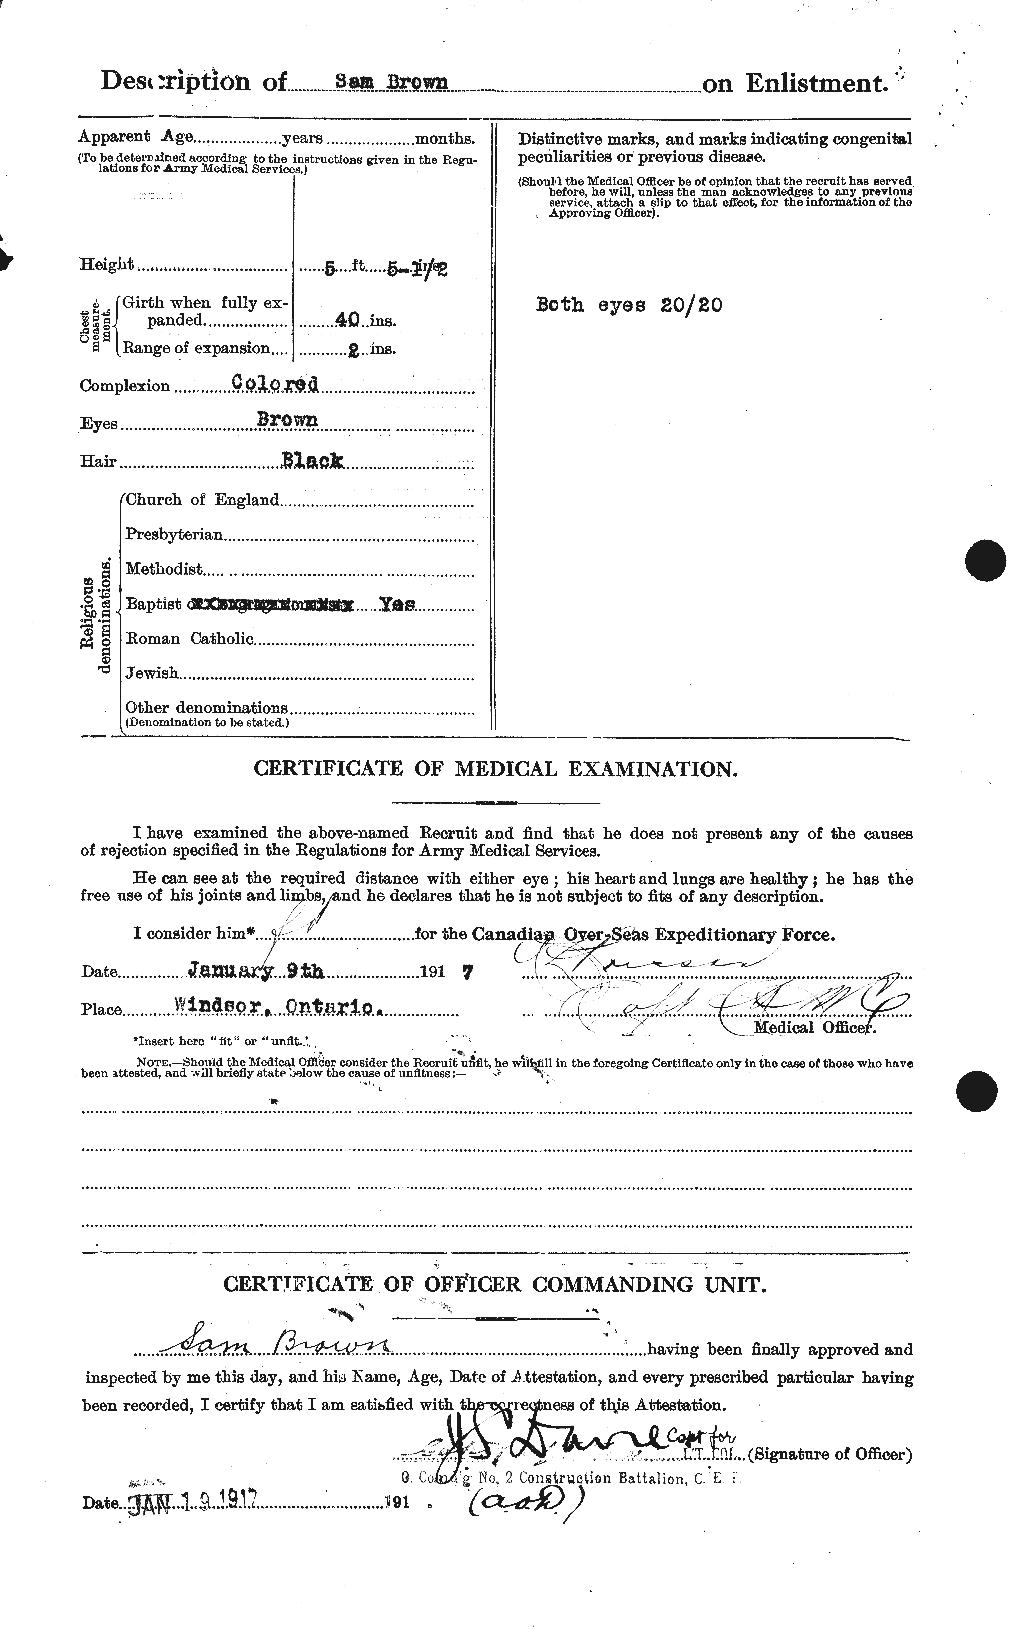 Personnel Records of the First World War - CEF 265333b